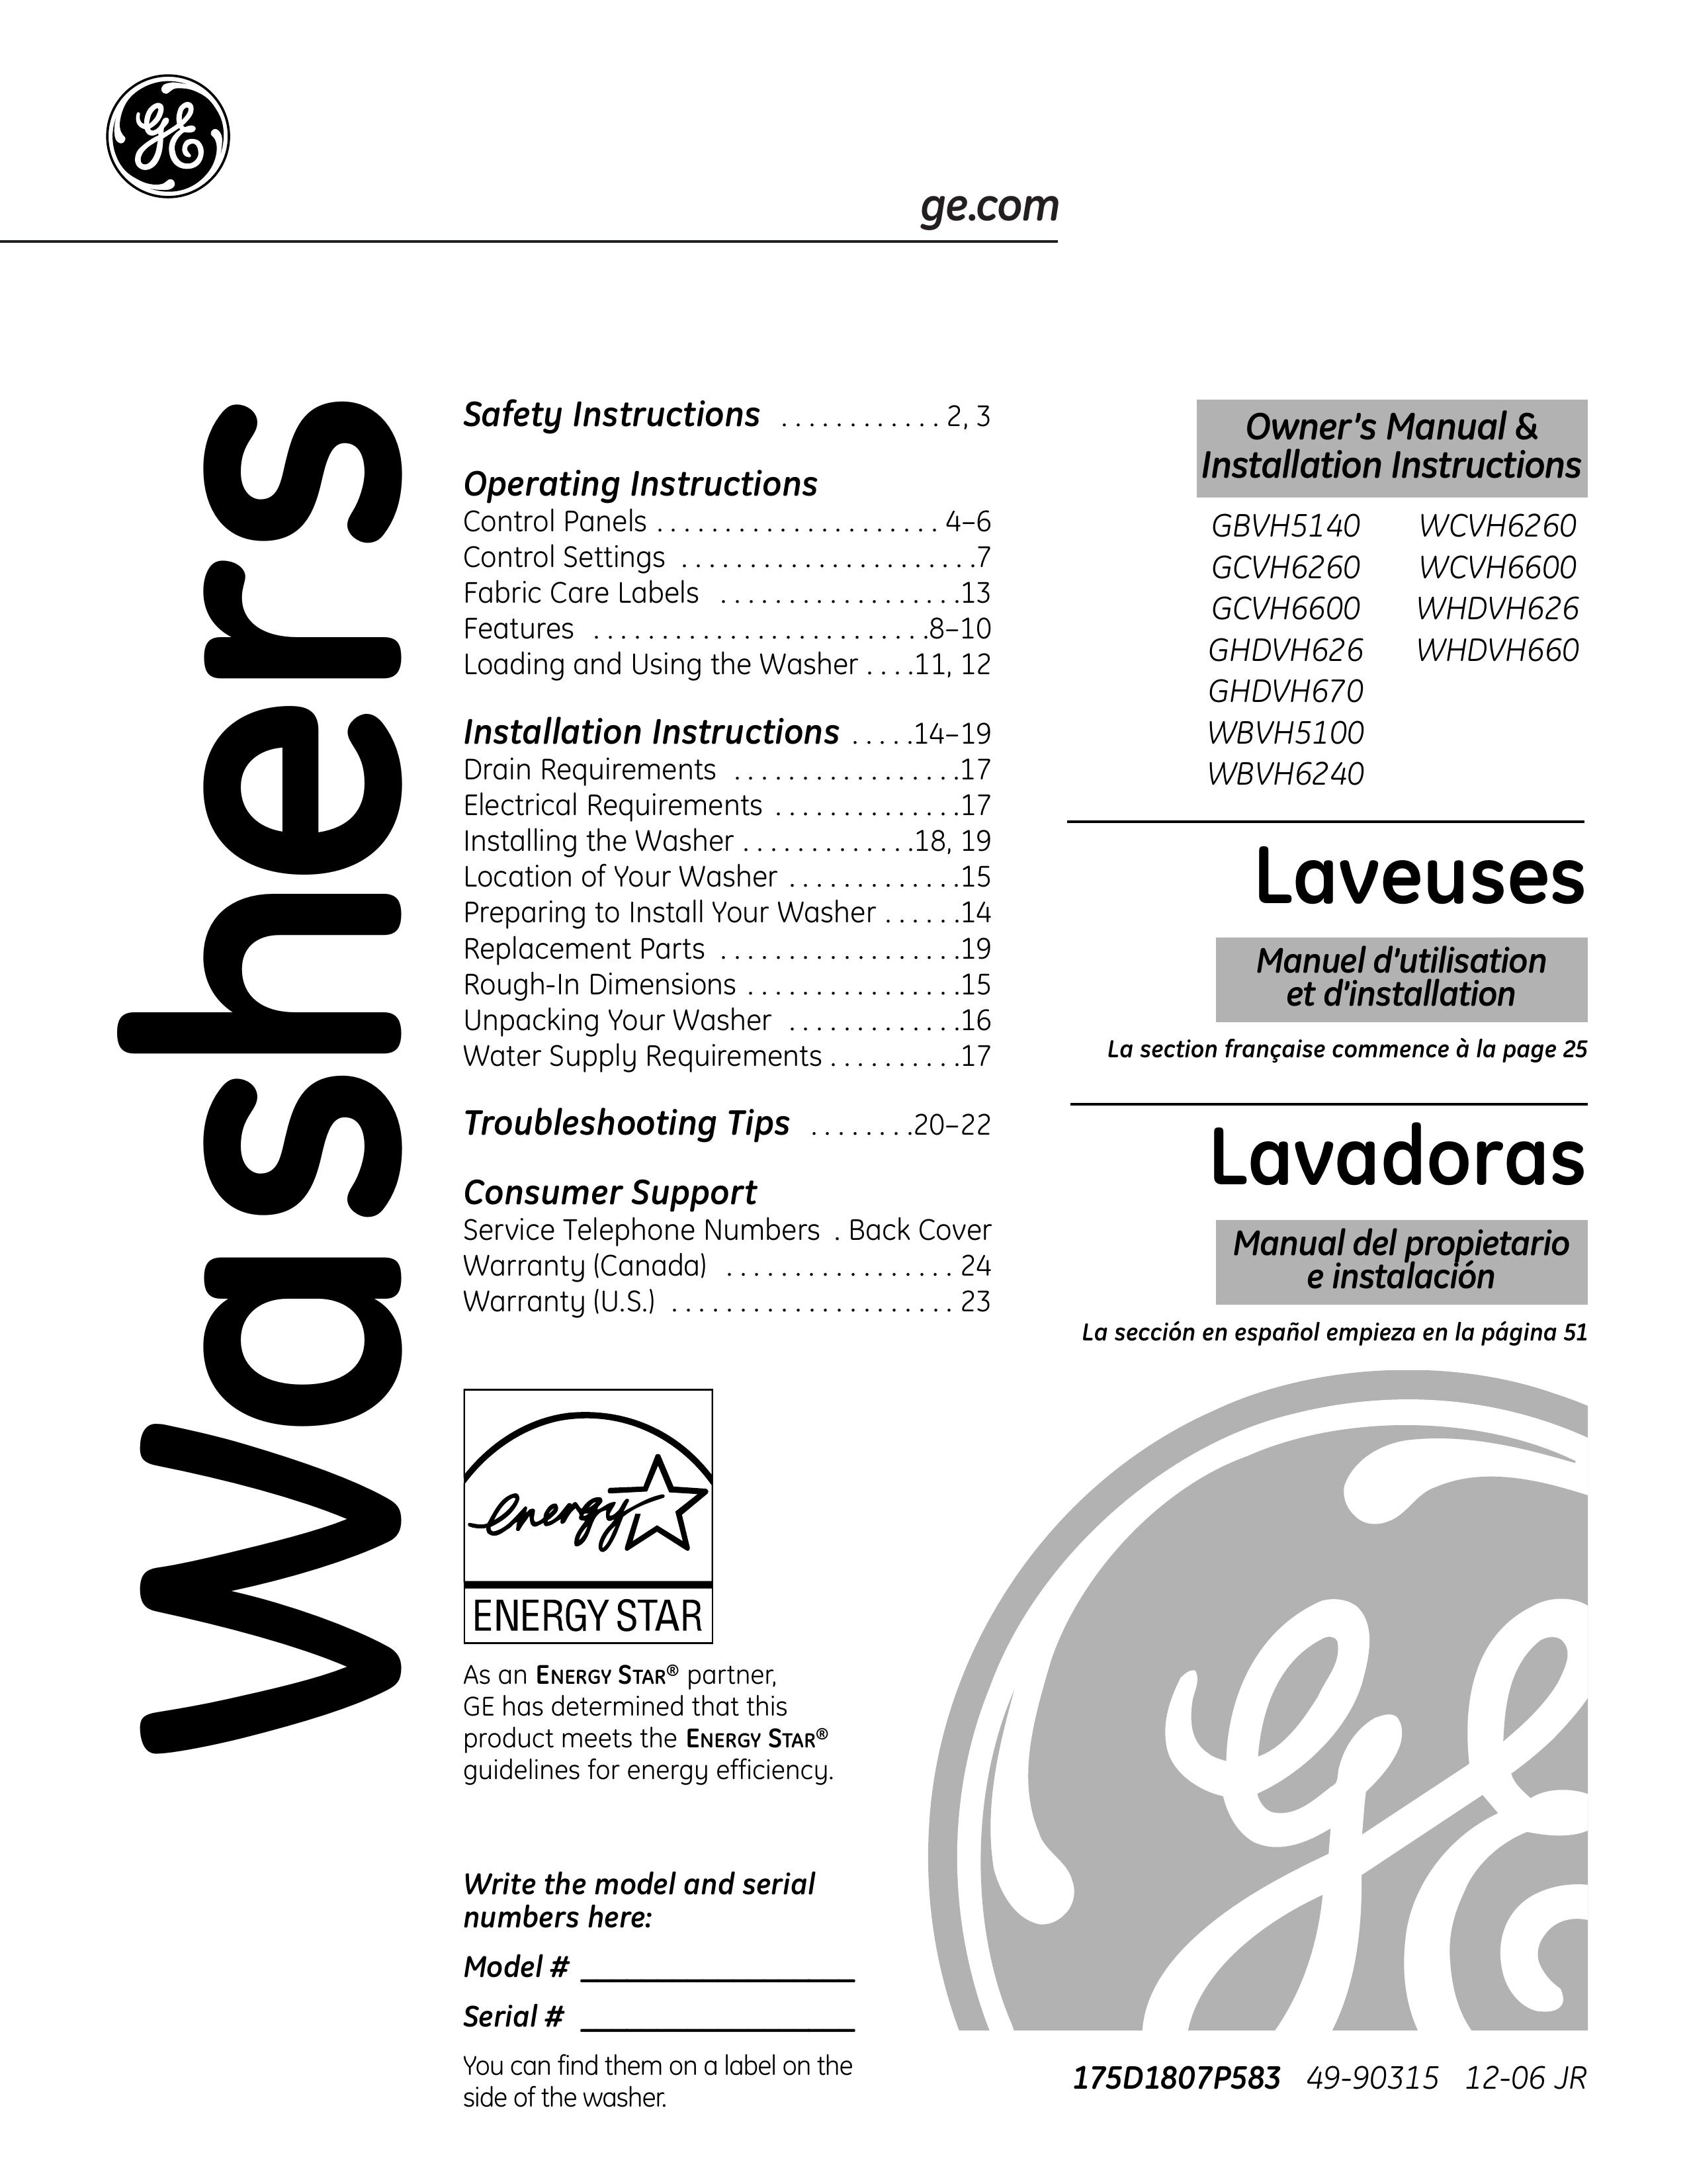 GE GCVH6600 Washer User Manual